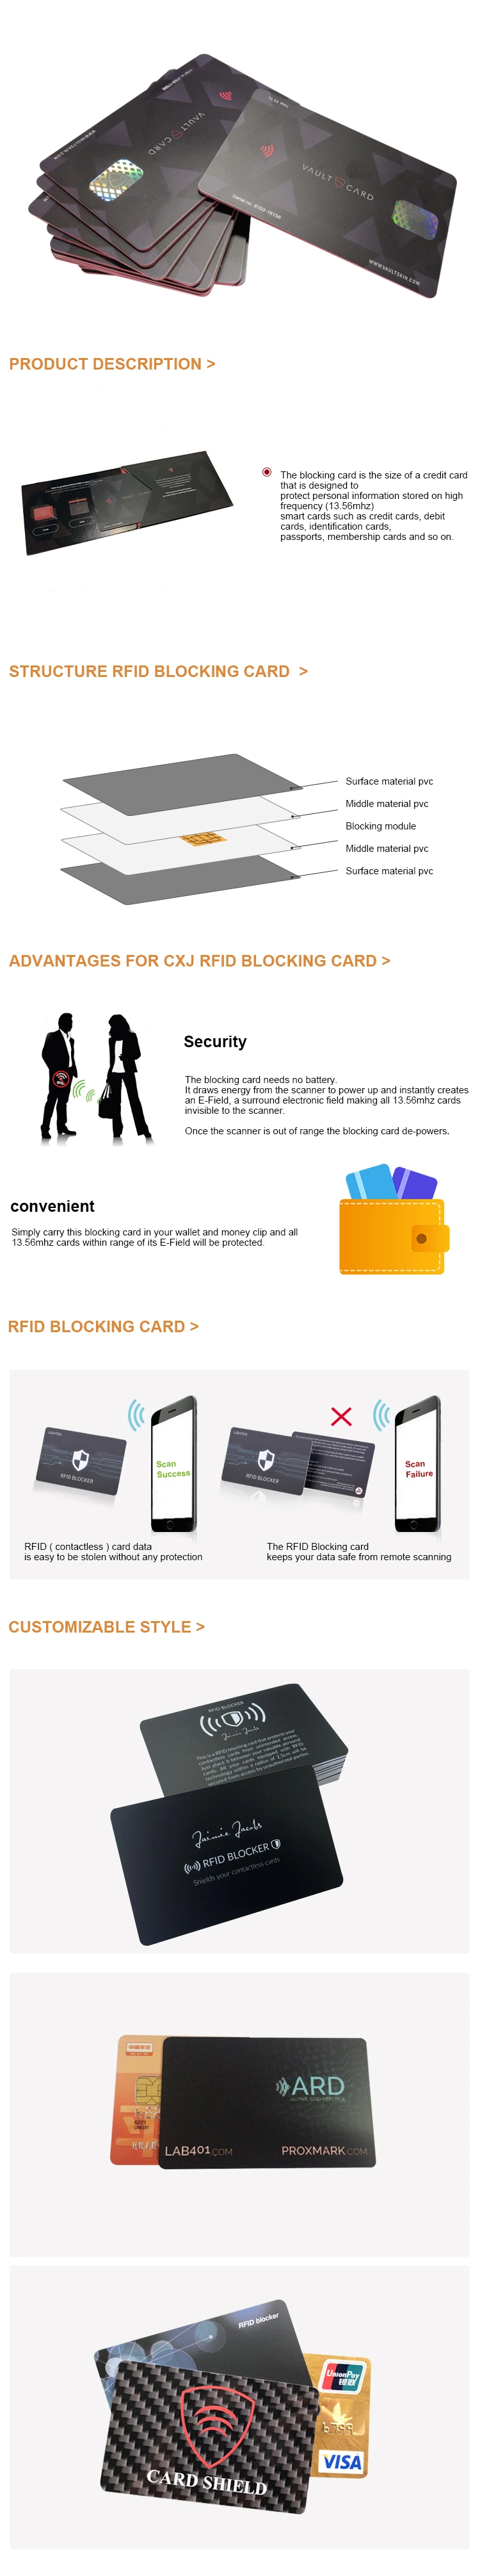 Anti-ID Theft RFID Blocking Card Security Guard Card for Credit Card, Bank Card Protection